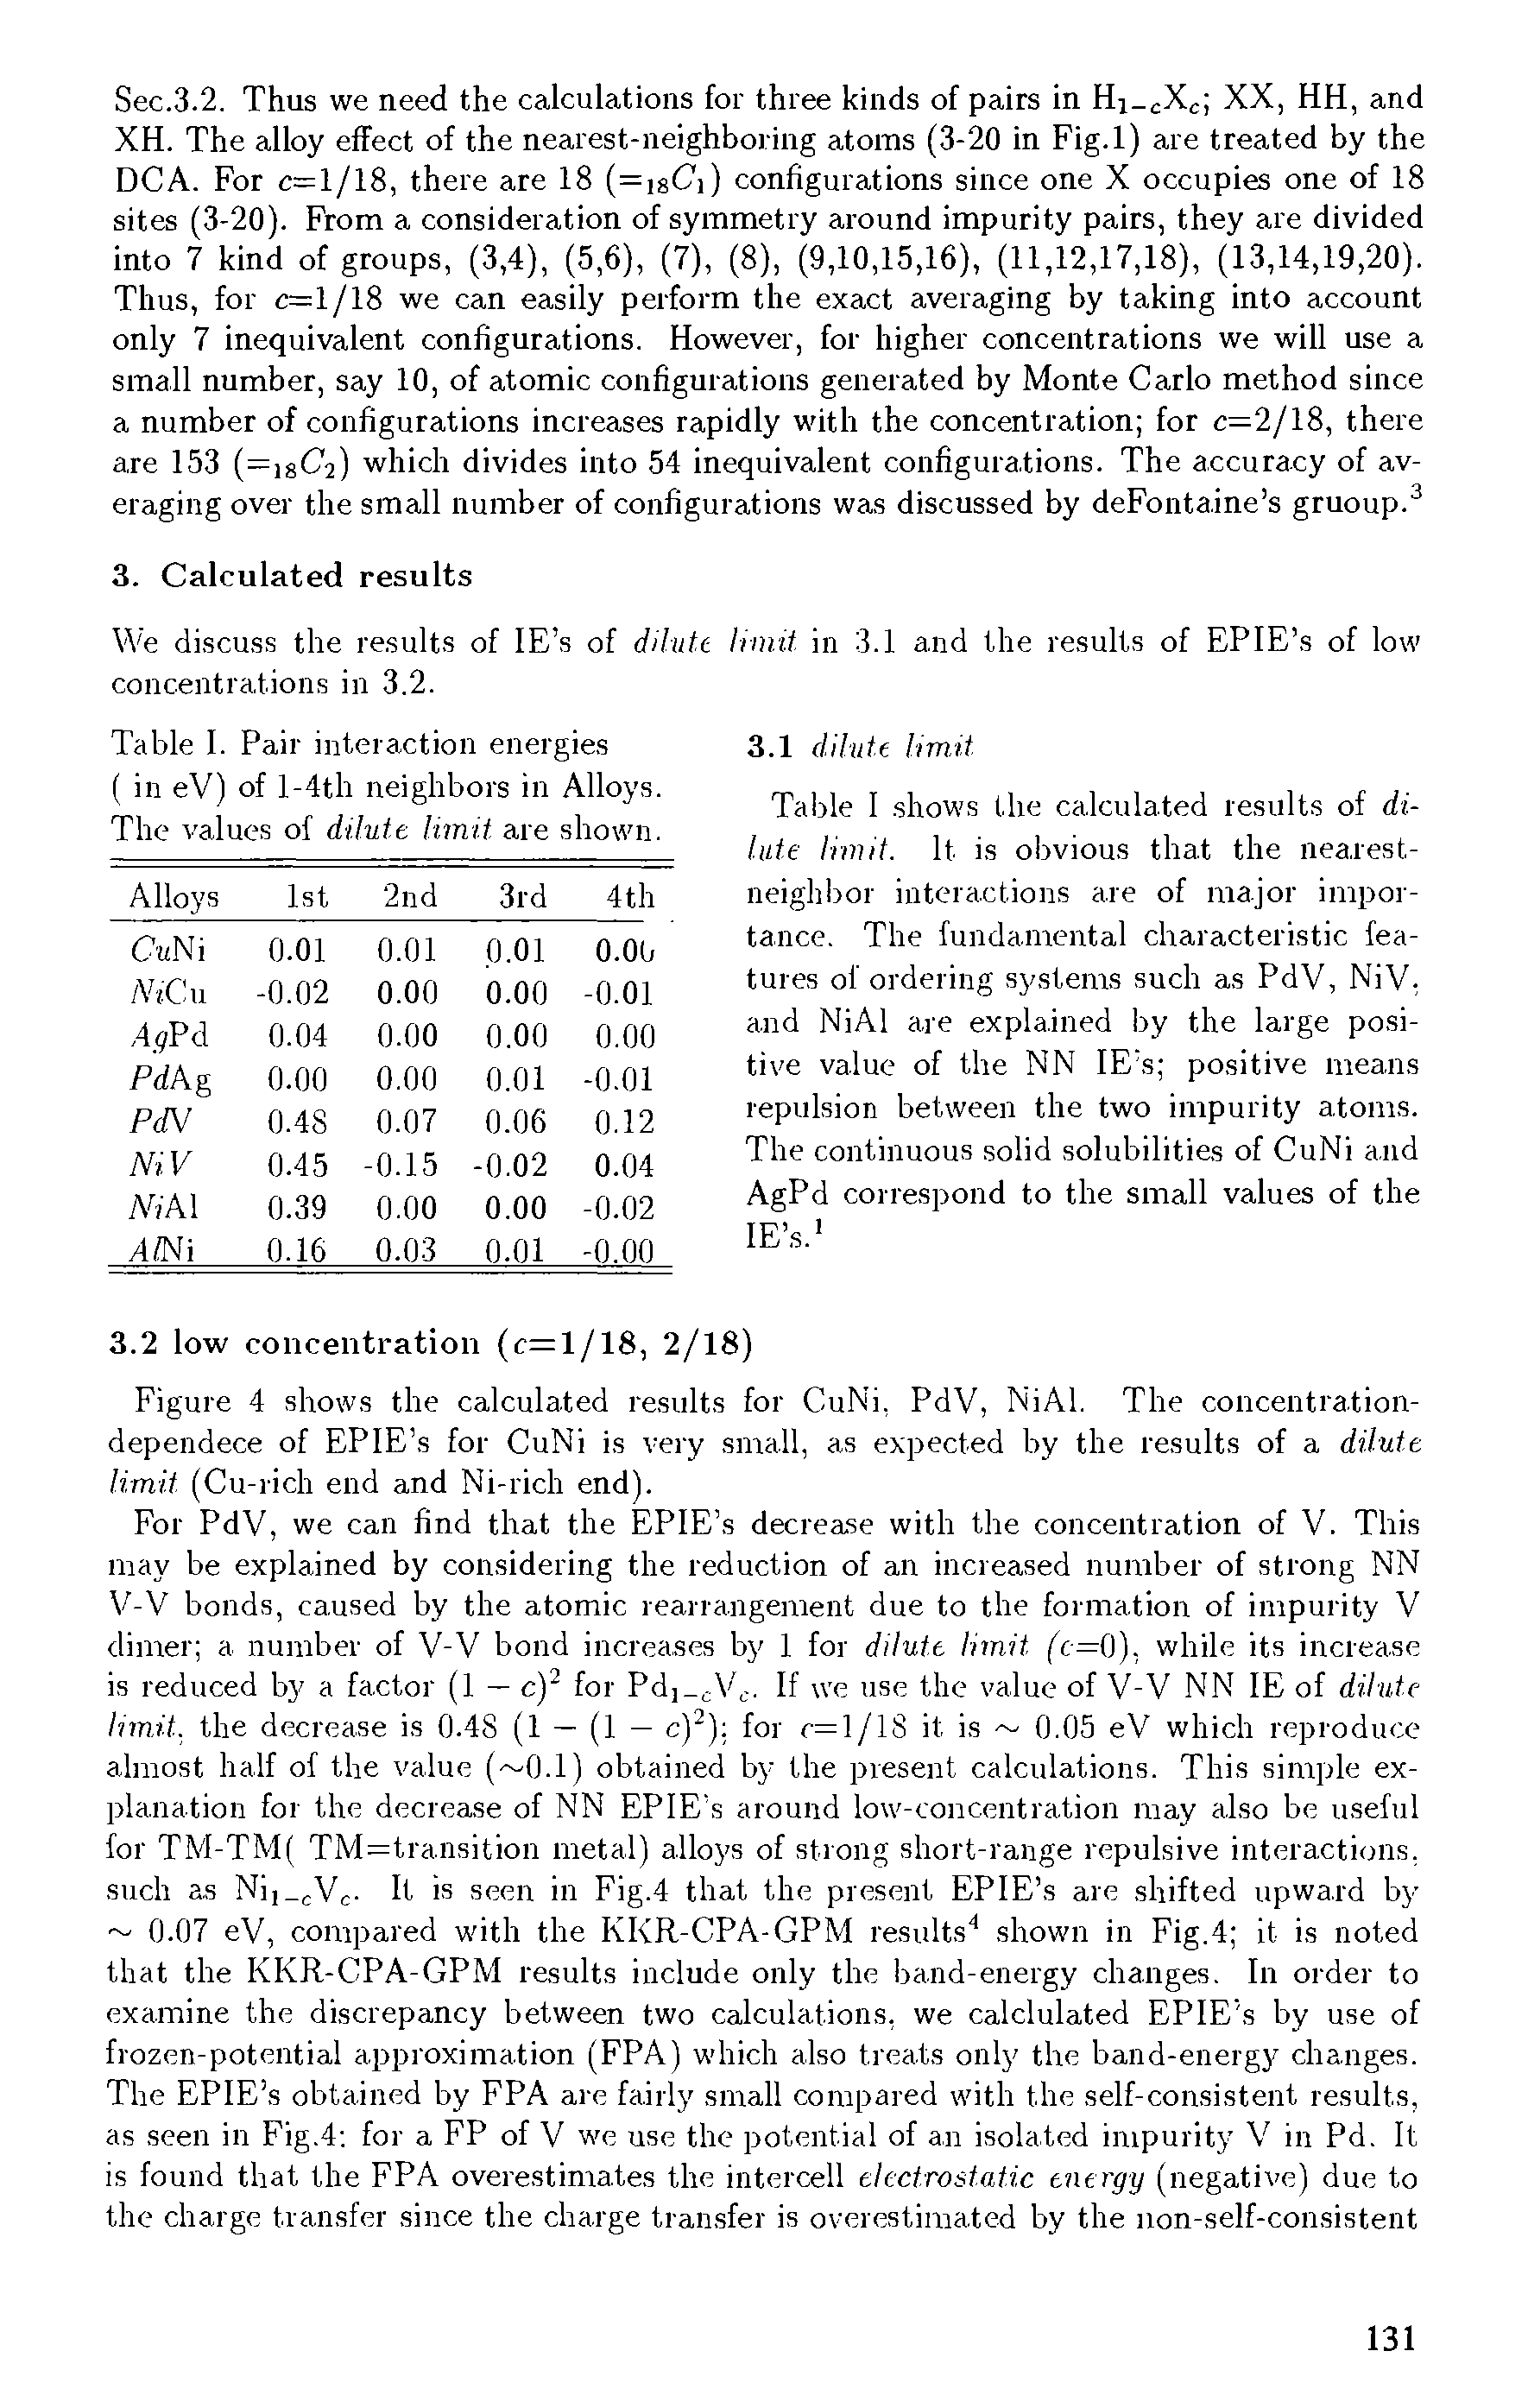 Table I. shows the calculated results of dilate limit. It is obvious that the nea.rest-neighlror interactions are of major importance. The fundamental characteristic features of ordering systems such as PdV, NiV, and NiAl are explained by the large positive value of the NN IE s positive means repulsion between the two impurity atoms. The continuous solid solubilities of CuNi a.nd AgPd correspond to the small values of the IE s. ...